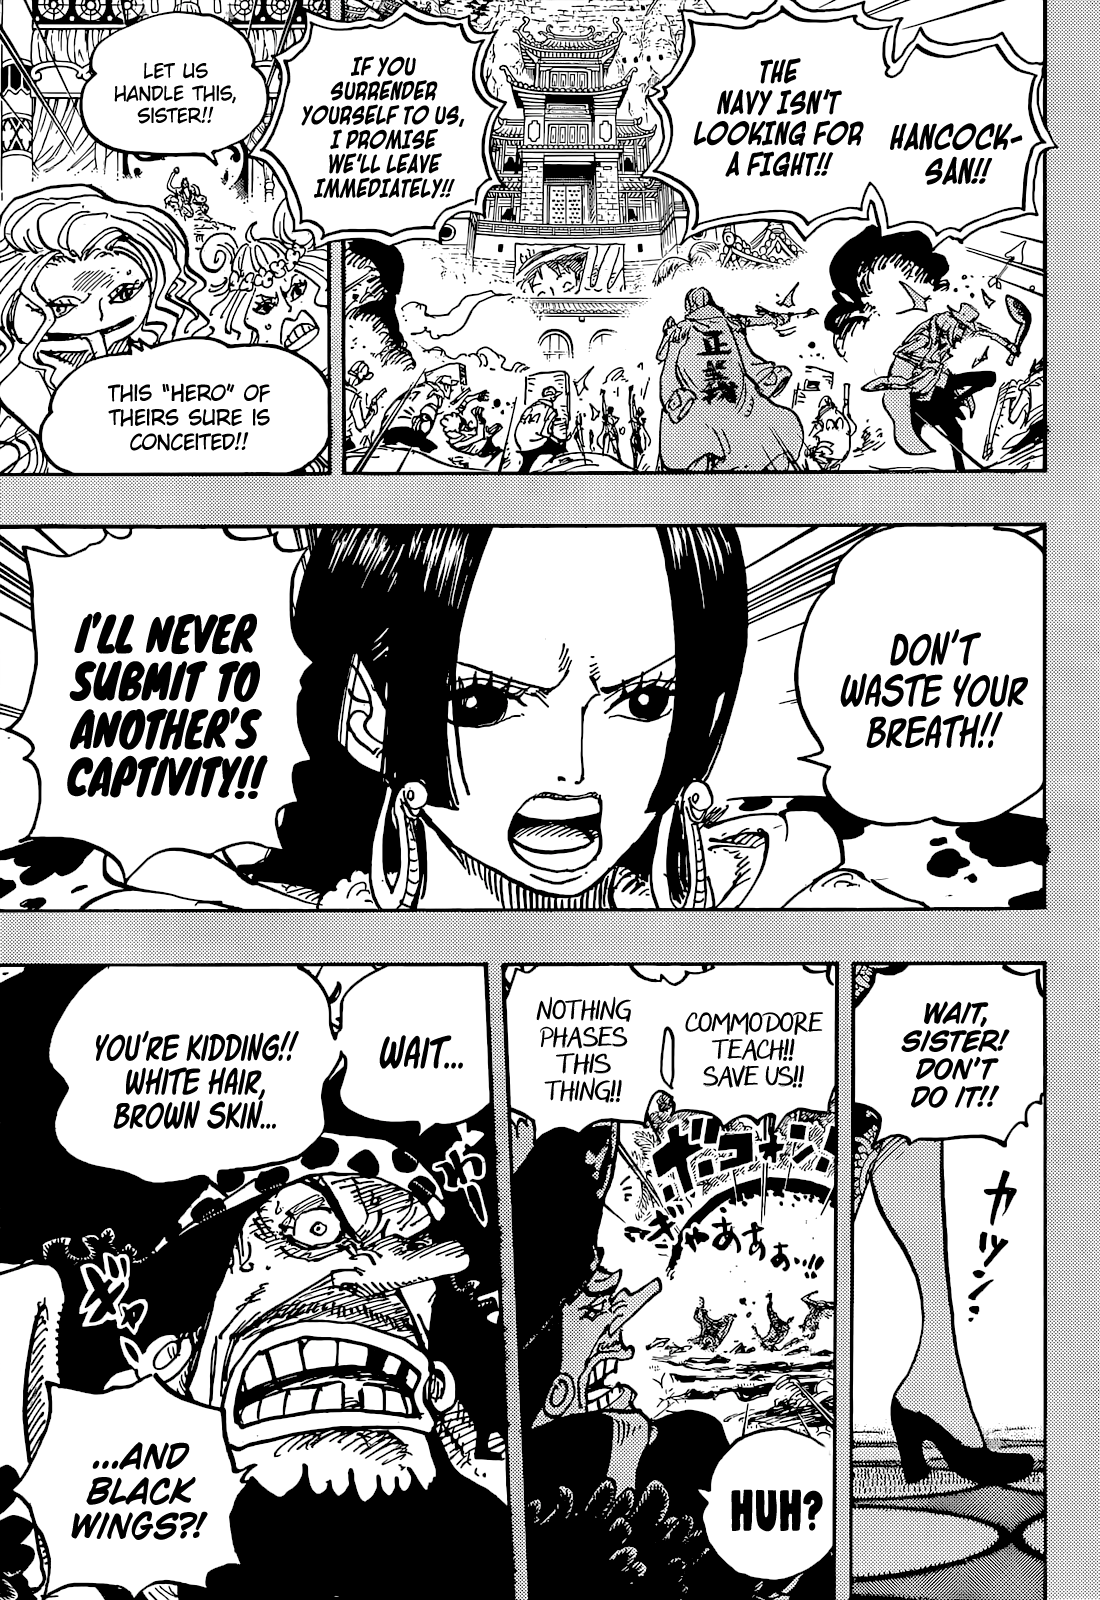 One Piece Chapter 1059, Page 9 Image